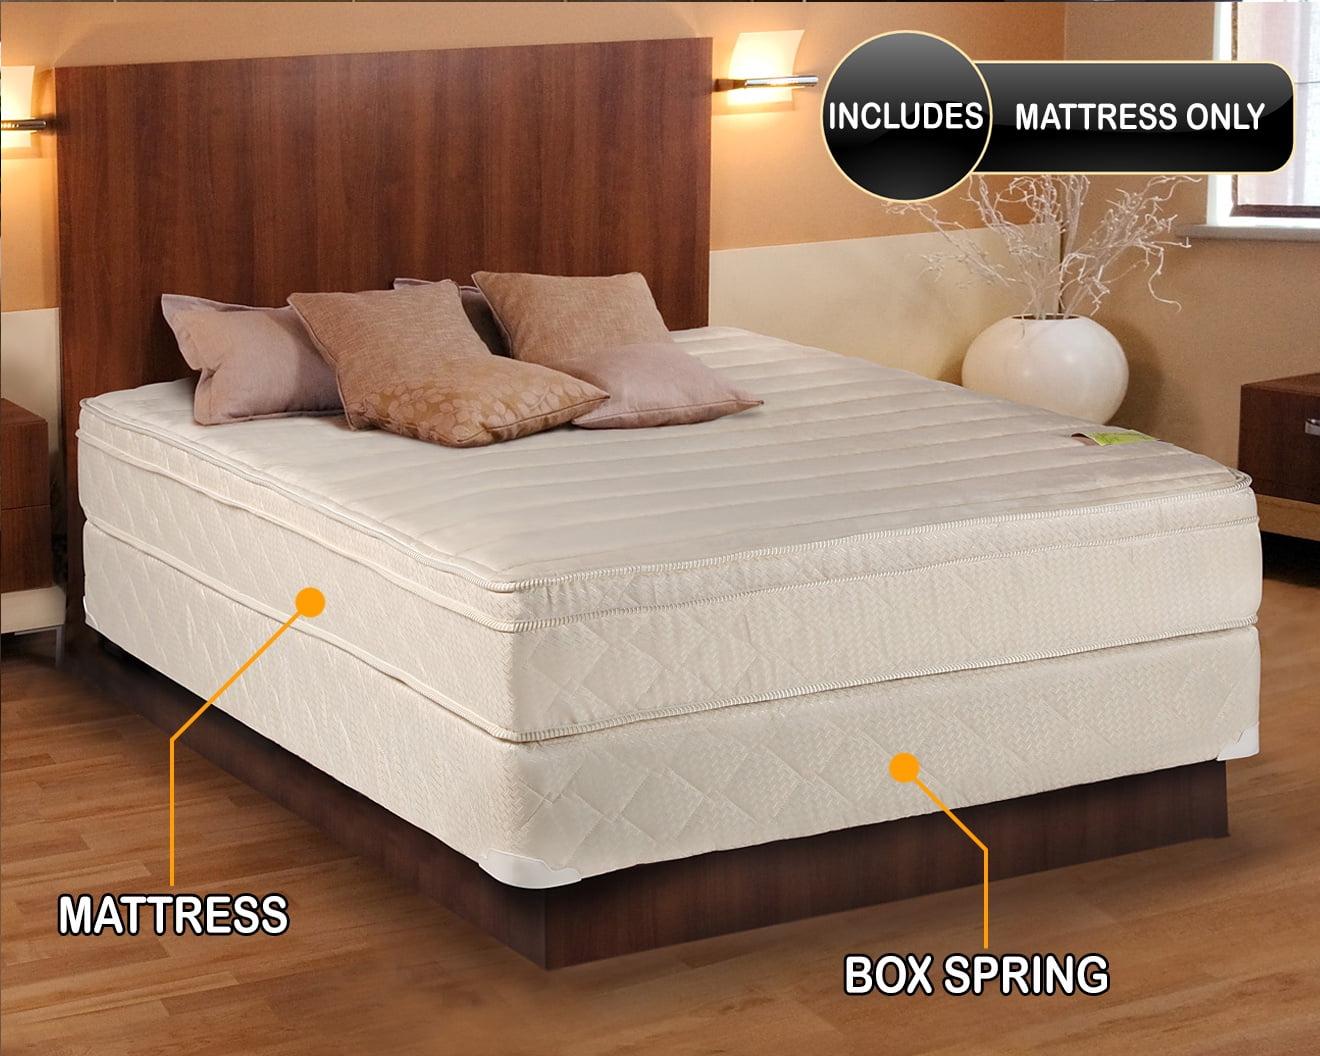 Chiro Premier Orthopedic Gold FIRM VERSION Twin Size Mattress and Box Spring Set 